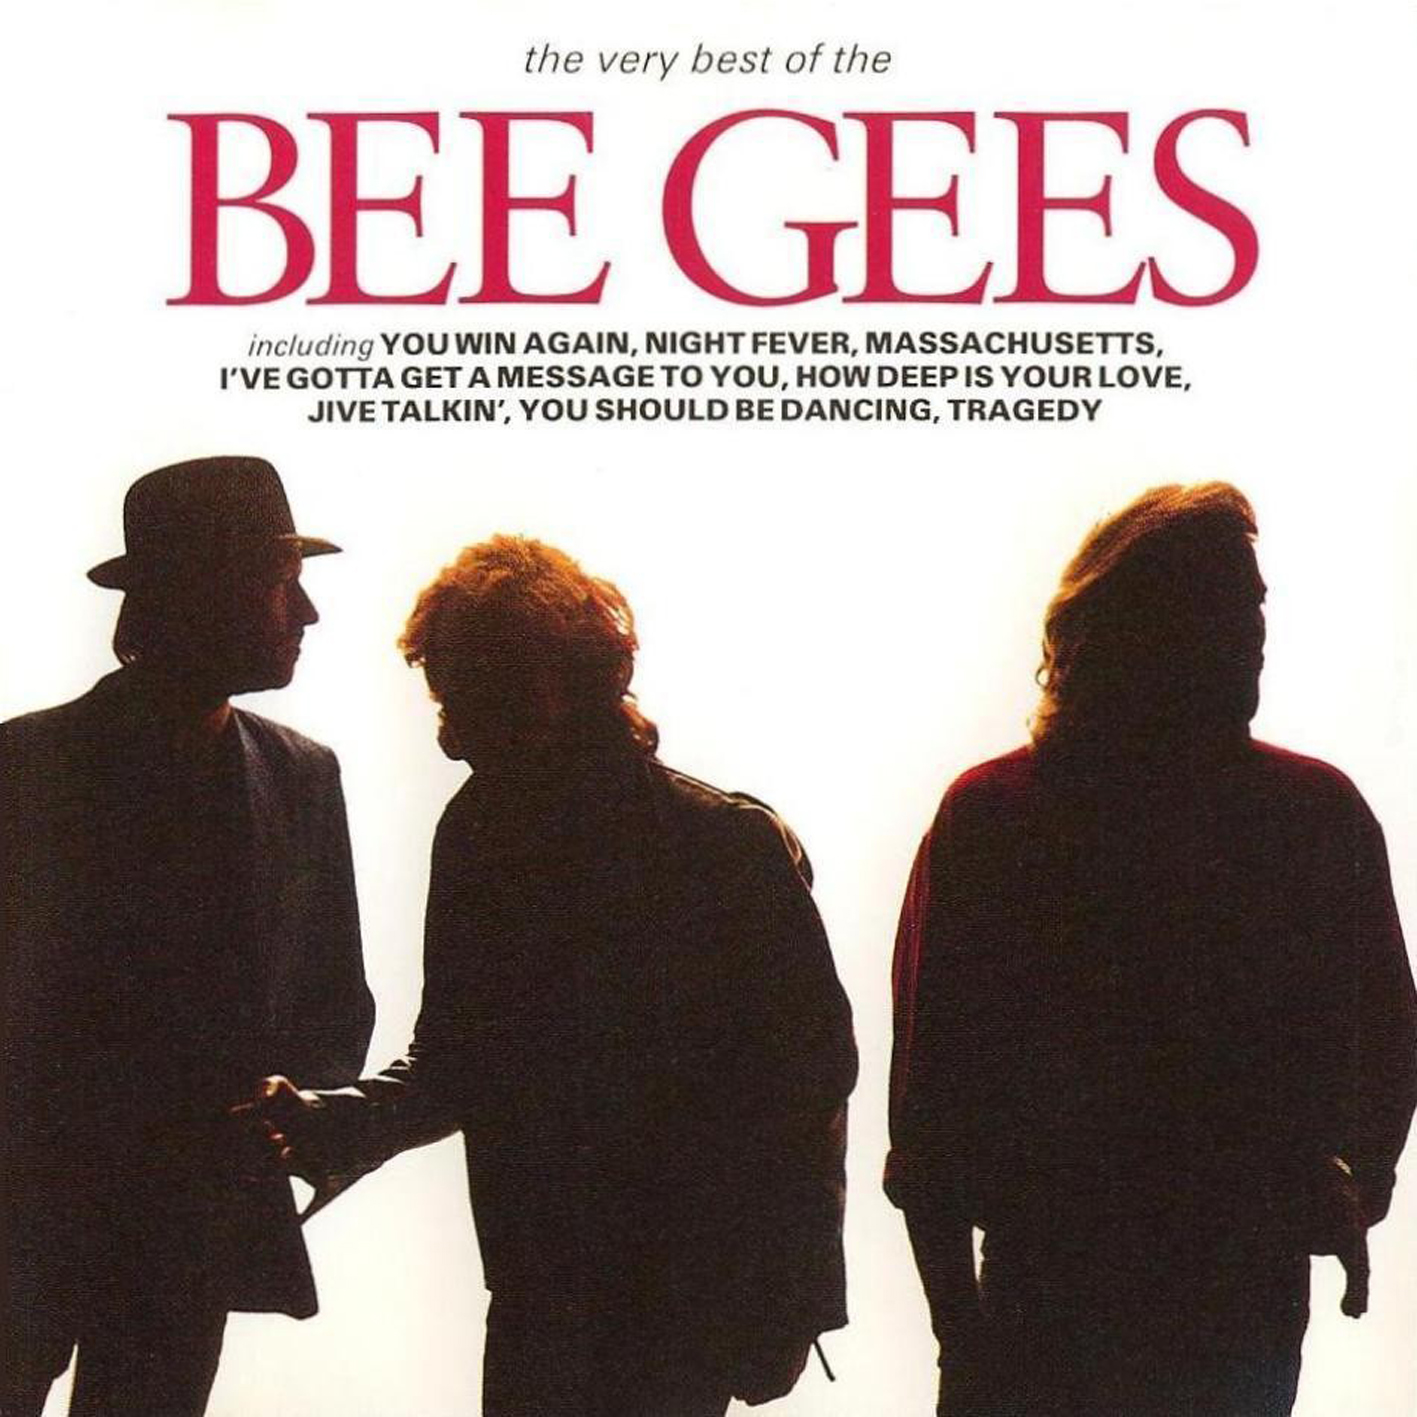 THE VERY BEST OF THE BEE GEES cover art